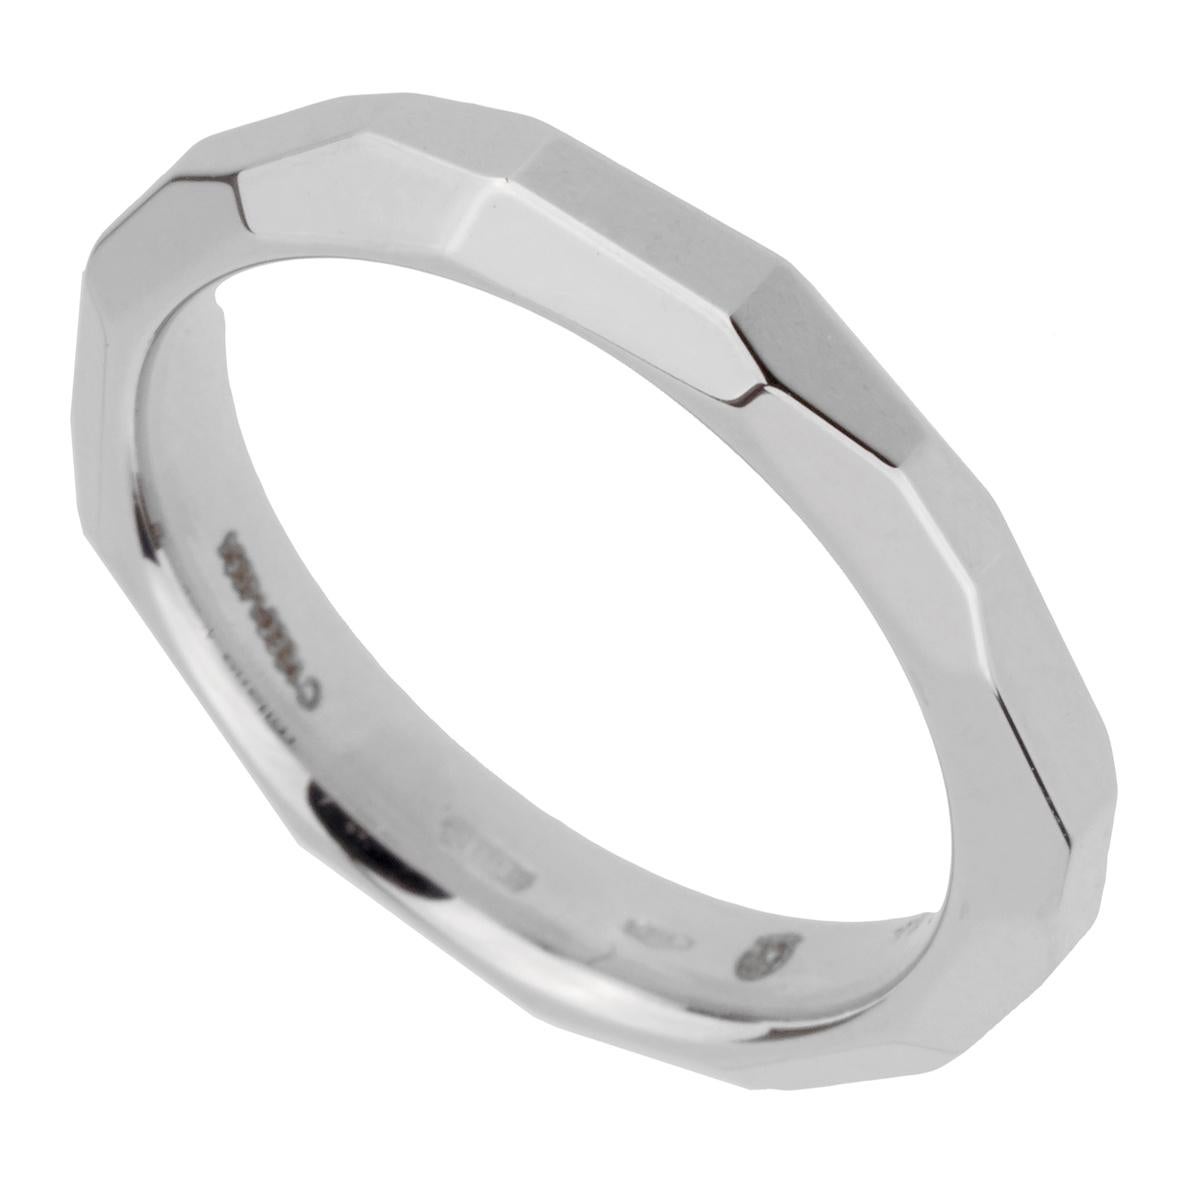 A chic white gold Pomellato band style ring crafted in 18k white gold, The ring measures a size 6.25 and can be resized.

Sku: 2385